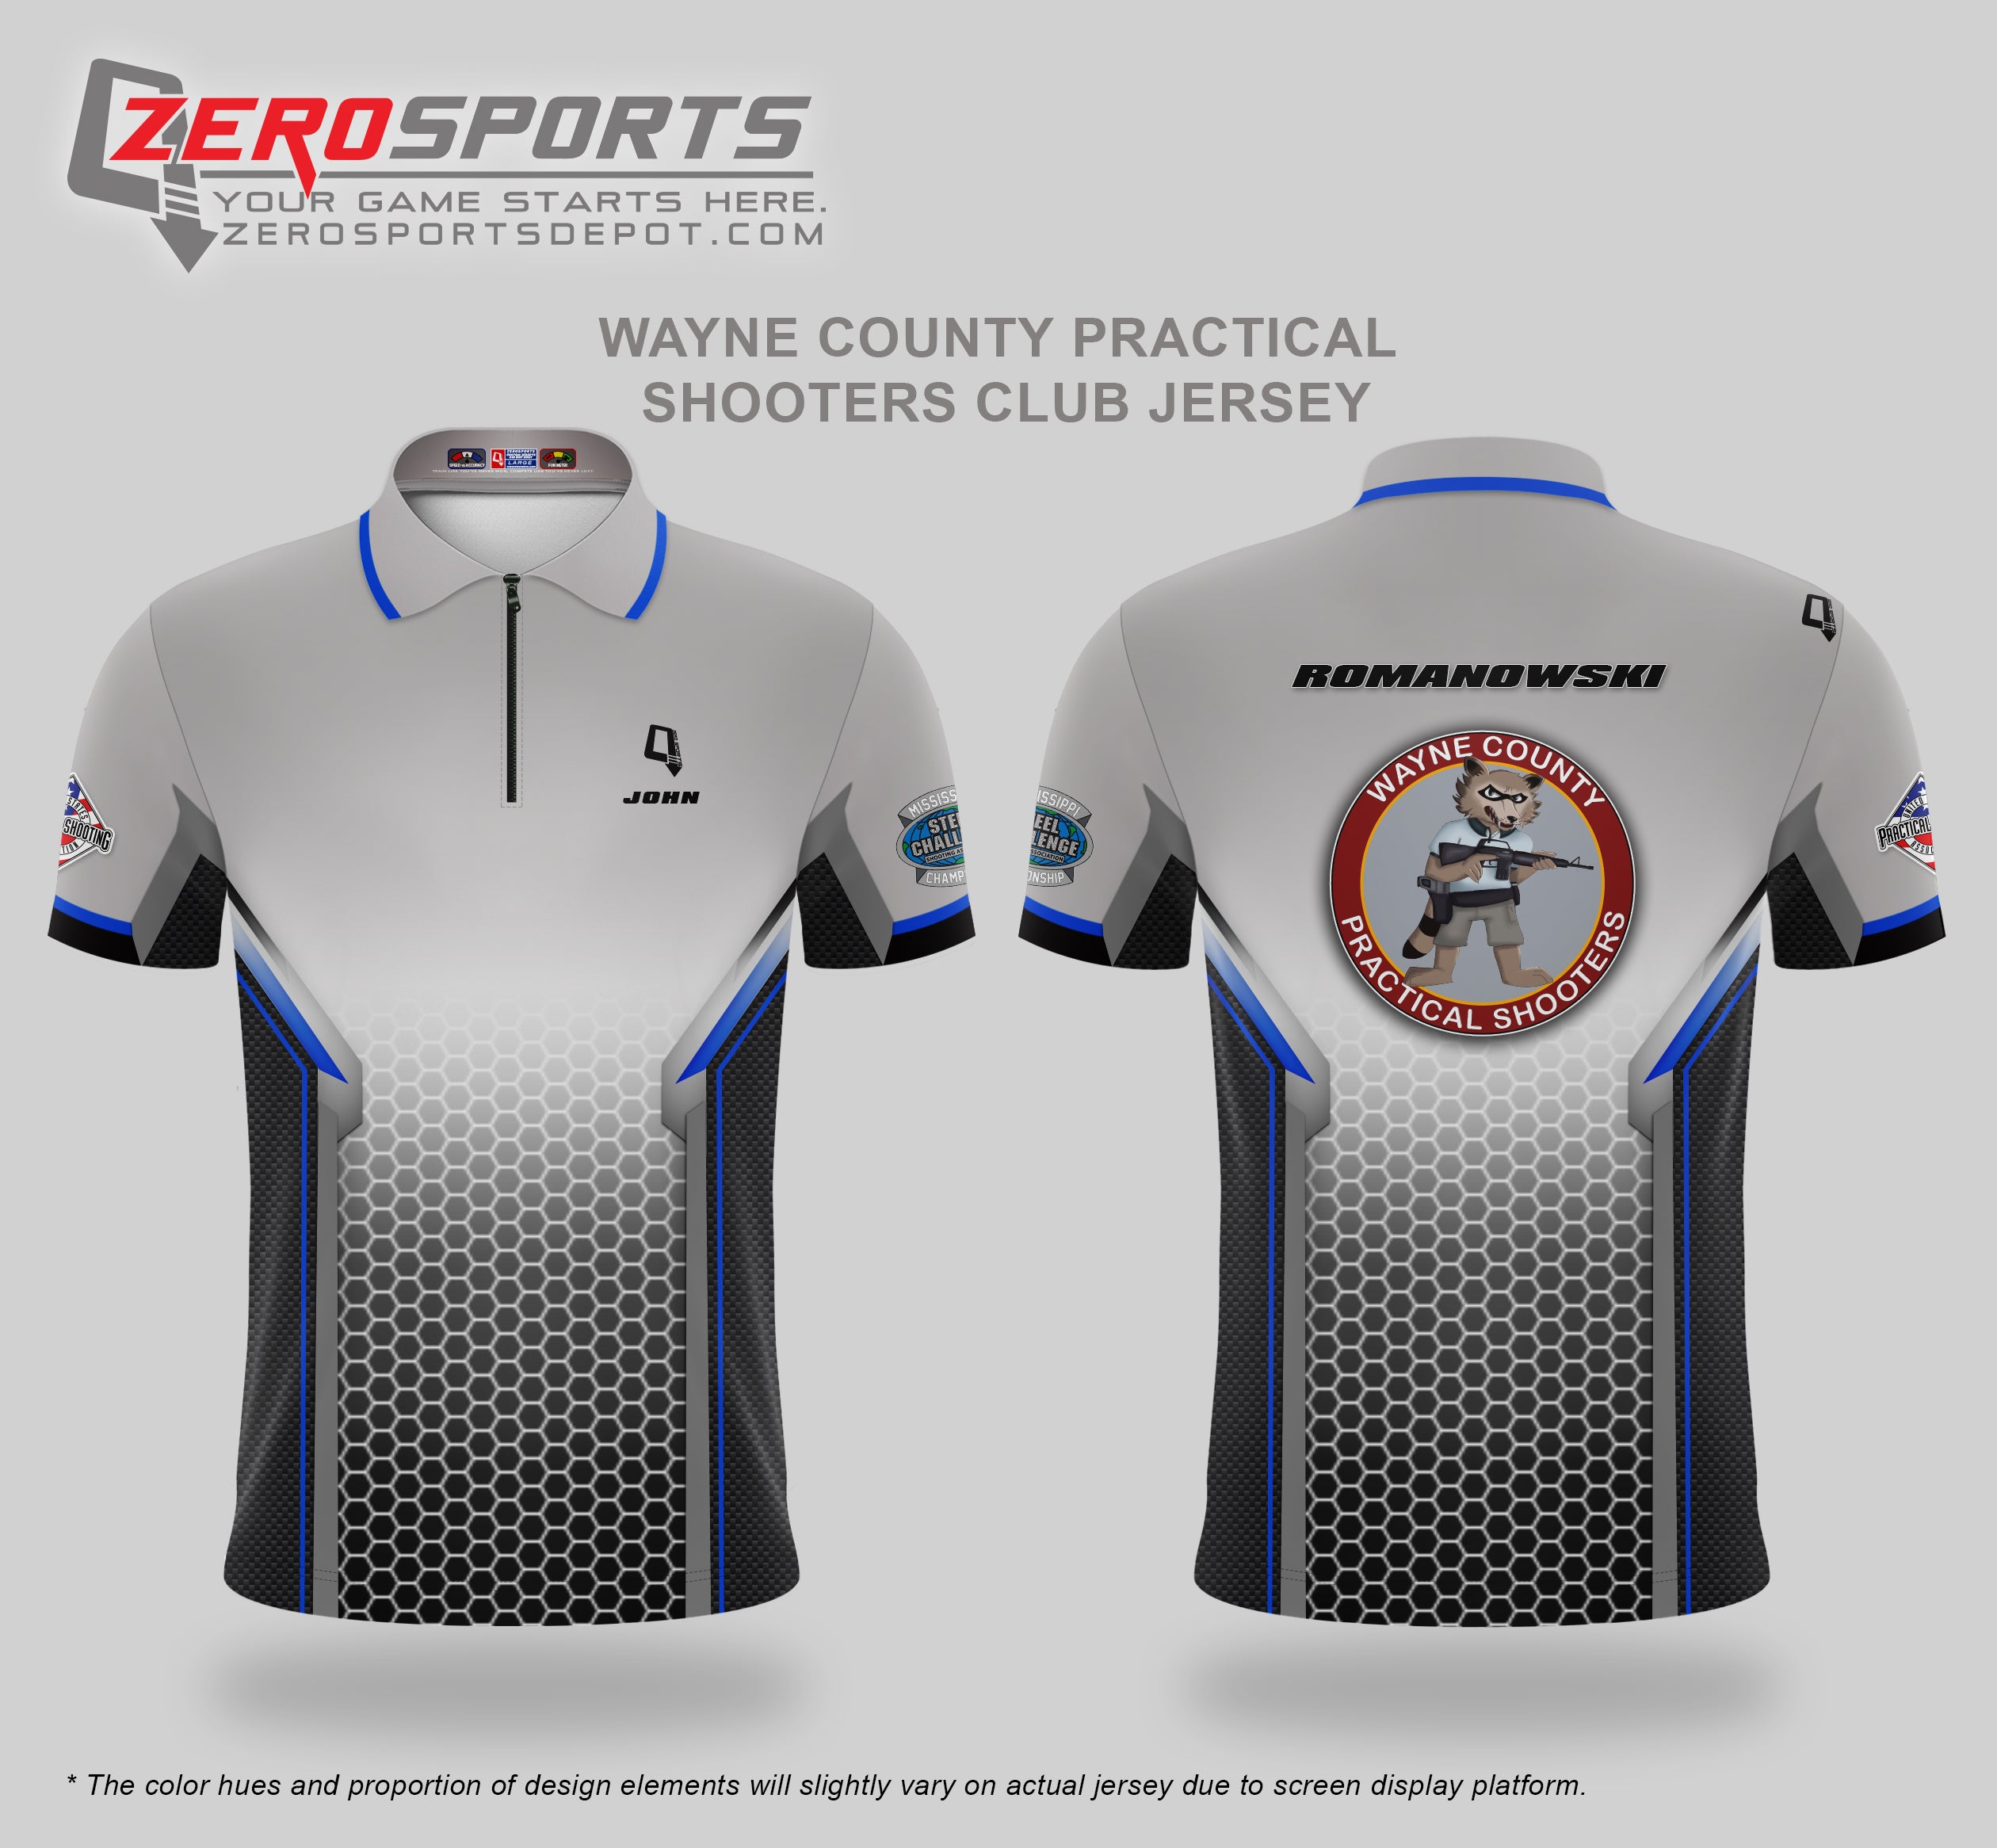 Wayne County Practical Shooters Club Jersey